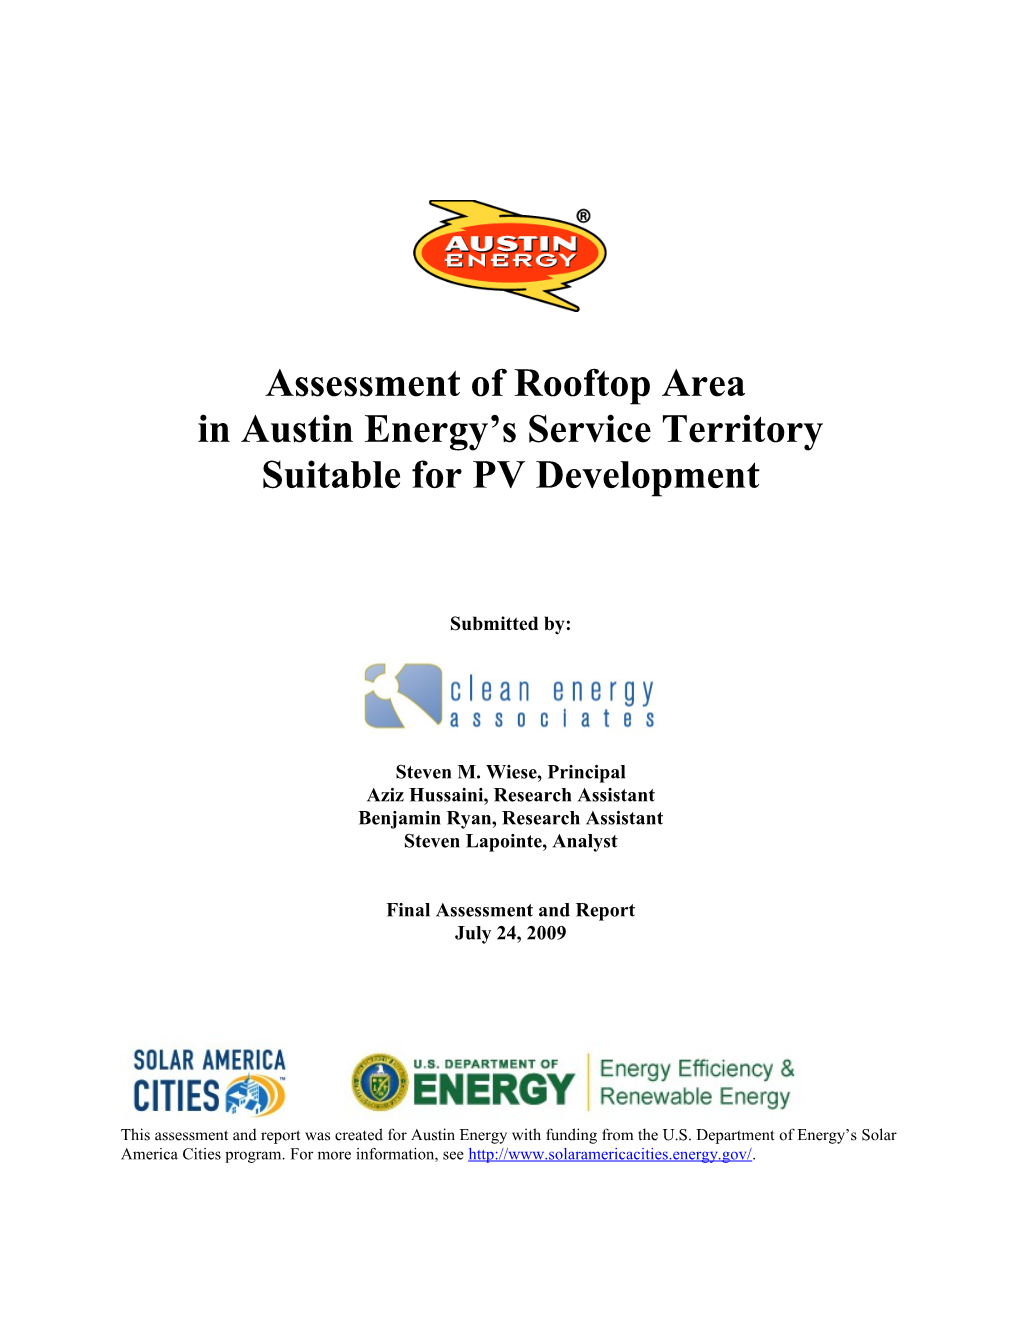 Assessment of Rooftop Area in Austin Energy S Service Territory Suitable for PV Development